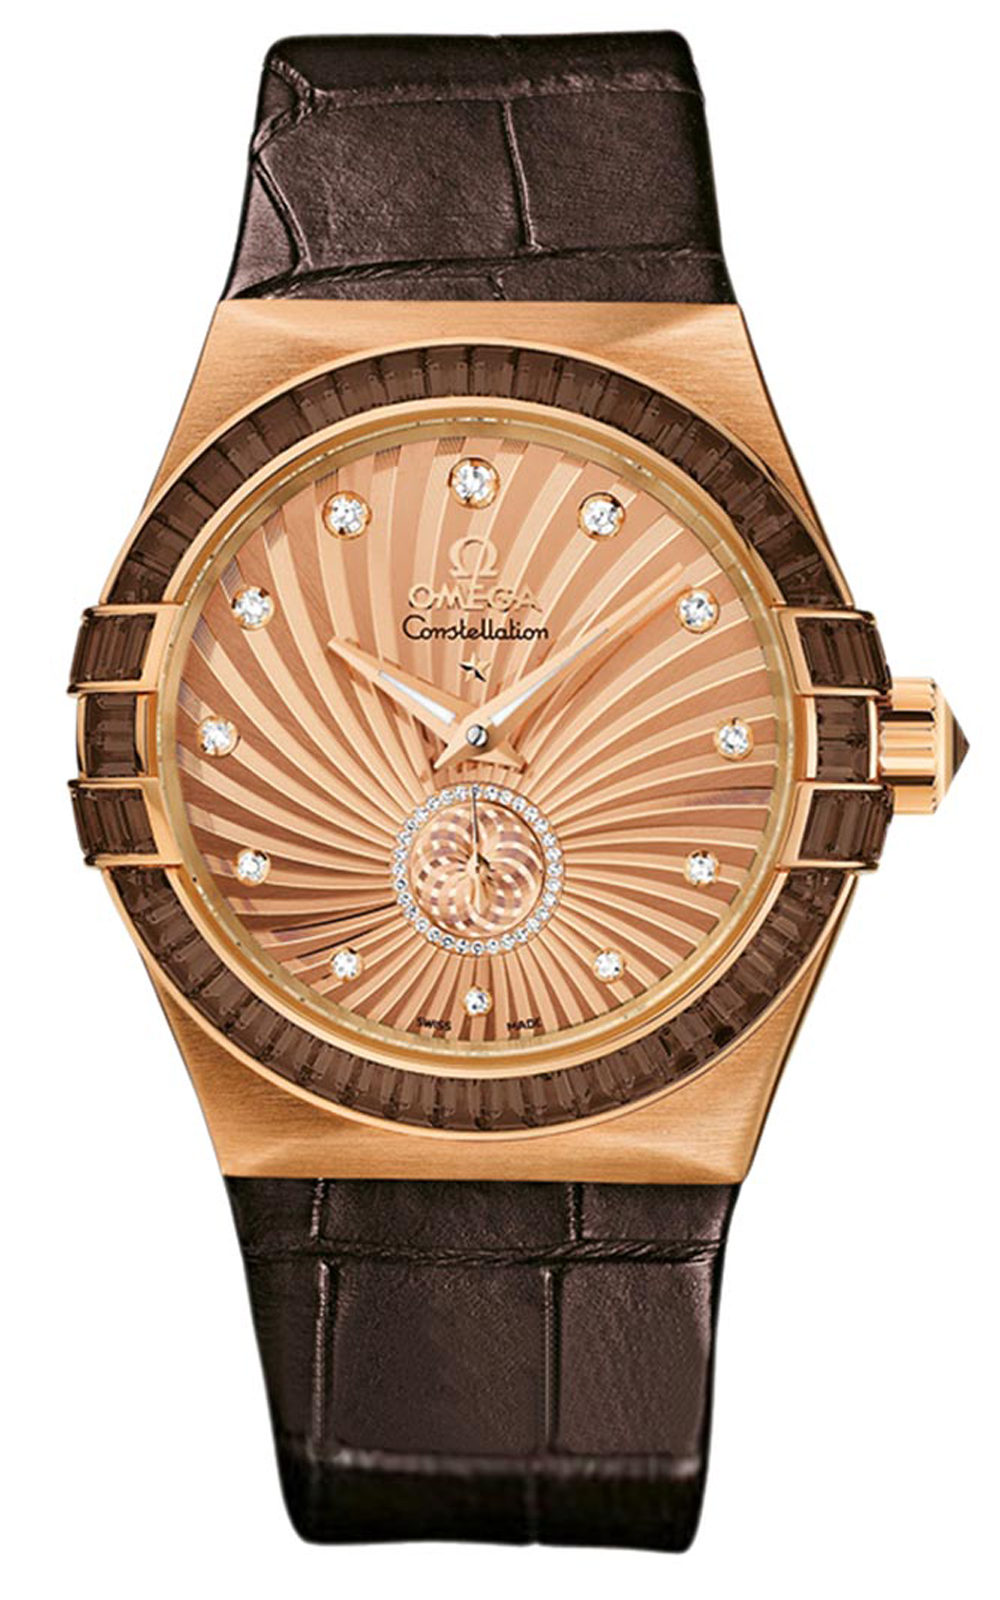 Omega Constellation Chronometer Ladies Limited Edition in Rose Gold with Diamond Bezel